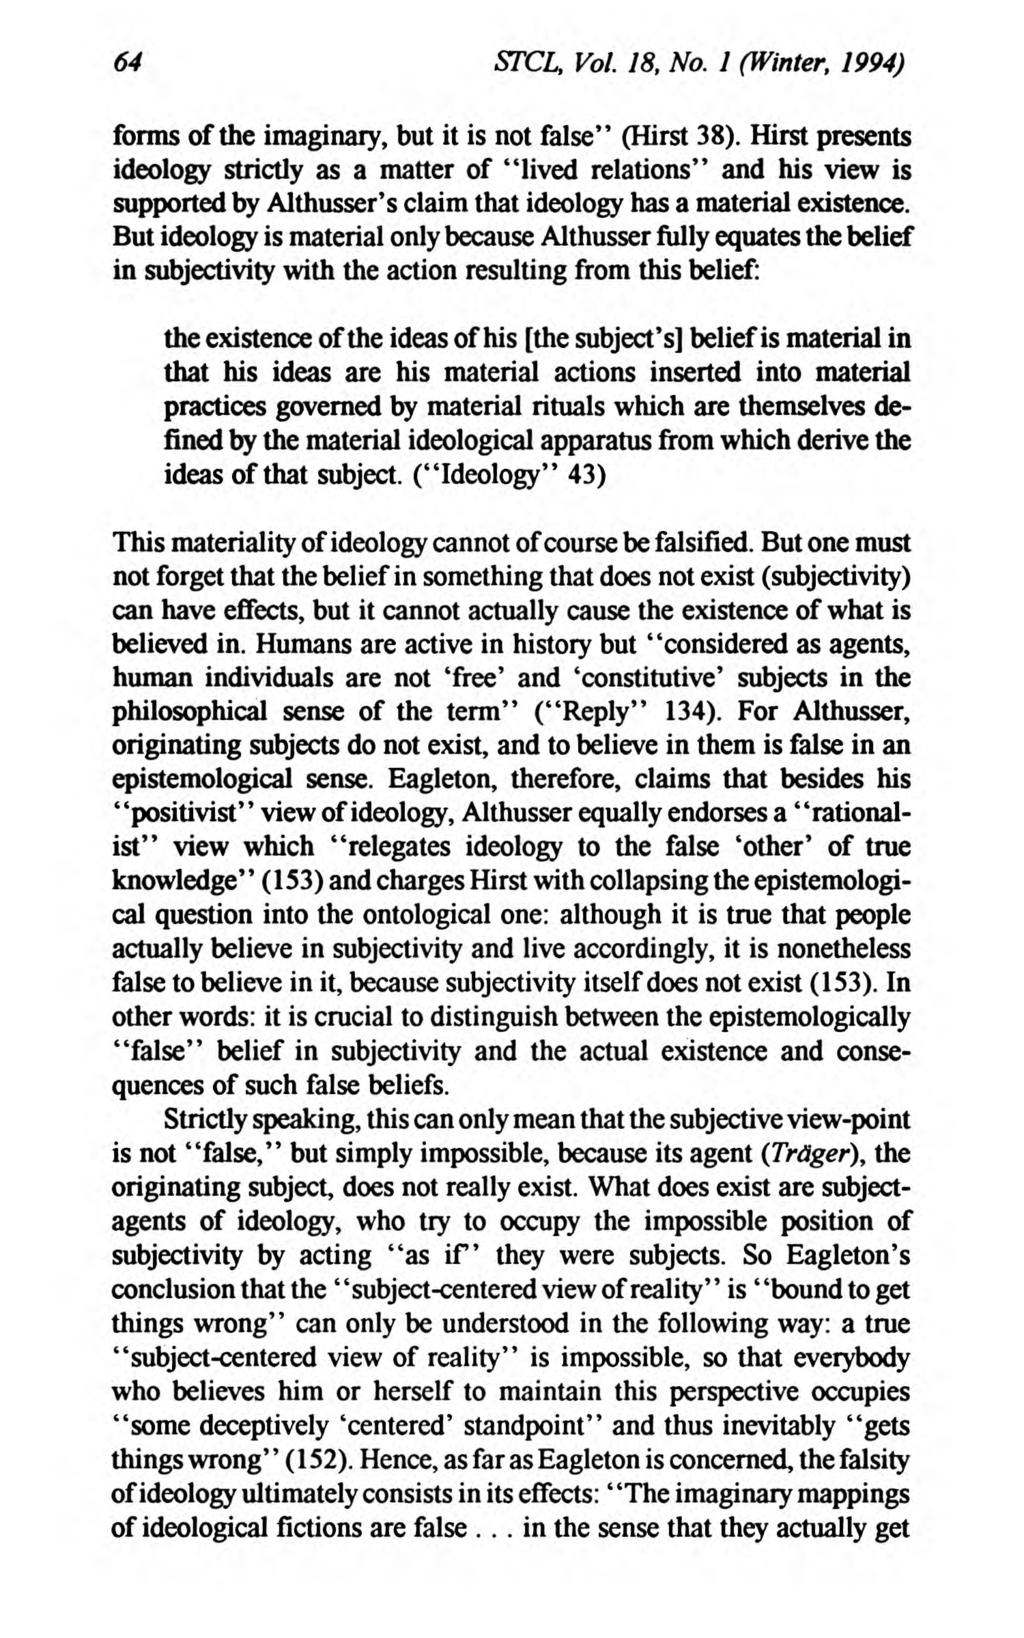 64 Studies in 20th & 21st Century Literature, STCL, Vol. 18, Iss. No. 1 [1994], 1 (Winter, Art. 7 1994) forms of the imaginary, but it is not false" (Hirst 38).